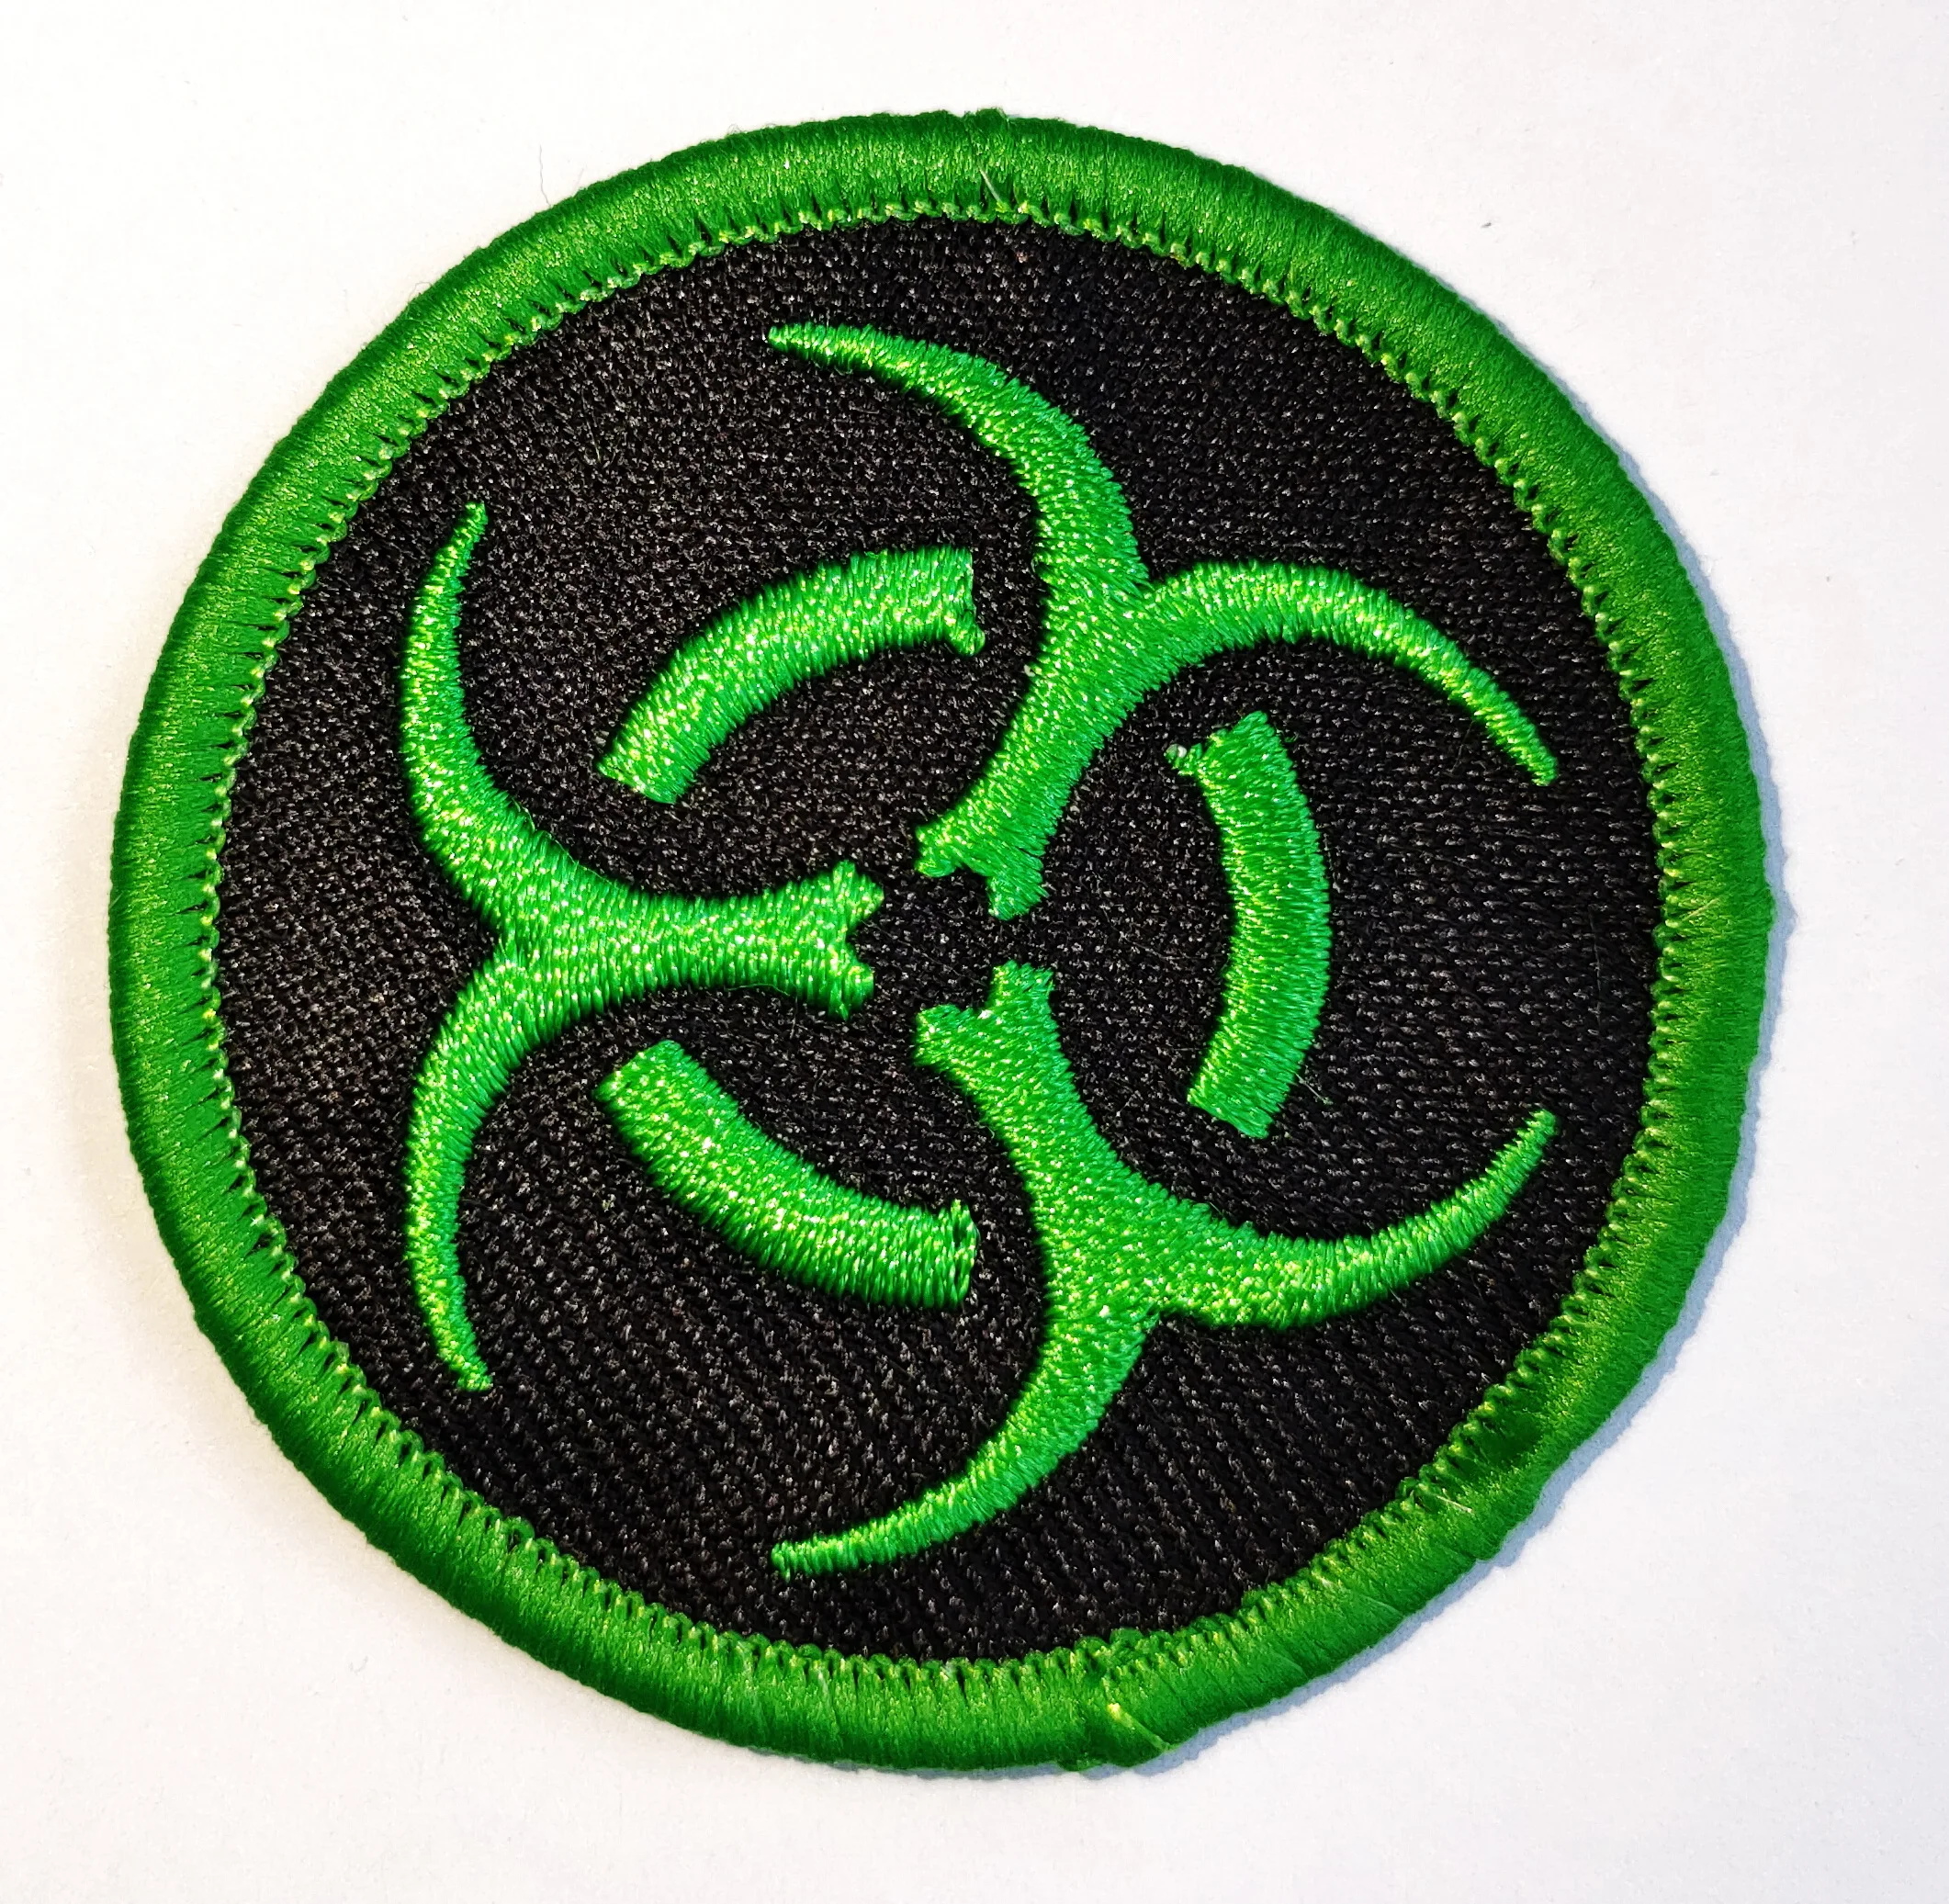 BIOHAZARD SYMBOL embroidered iron-on PATCH ZOMBIE GREEN new TOXIC WARNING DANGER 